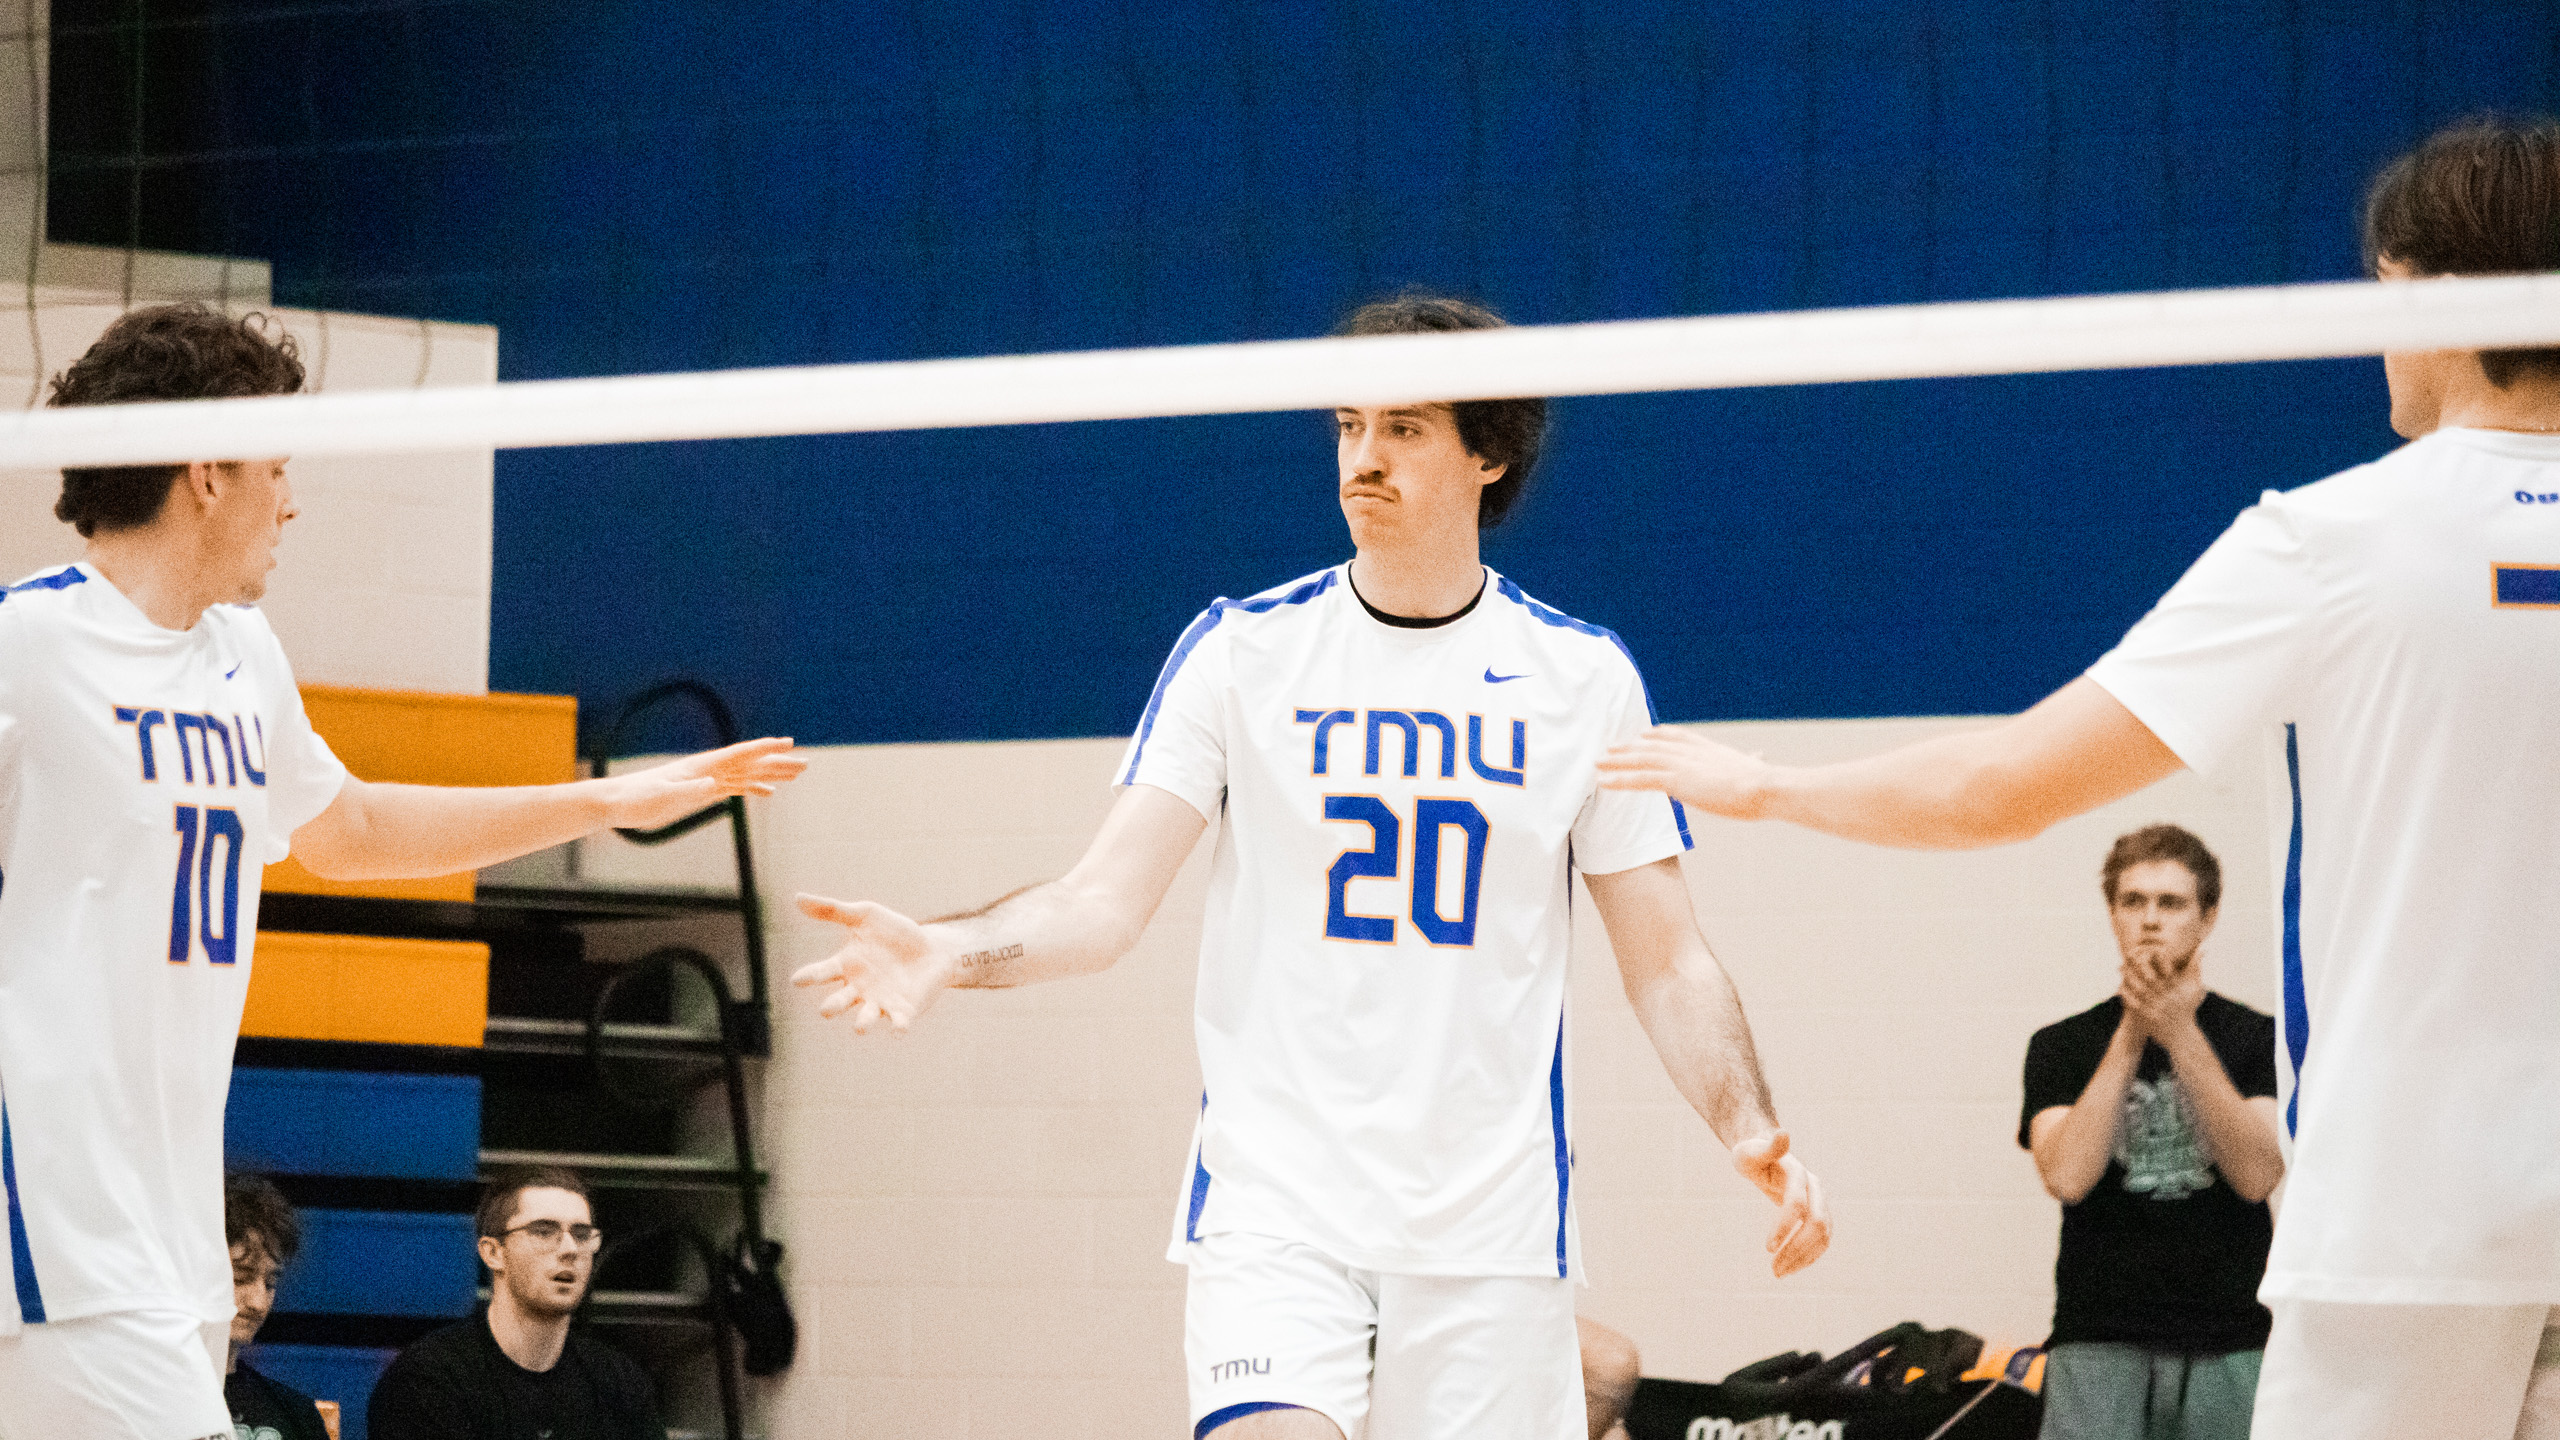 TMU men's volleyball player Alex King high fives his teammates on the court